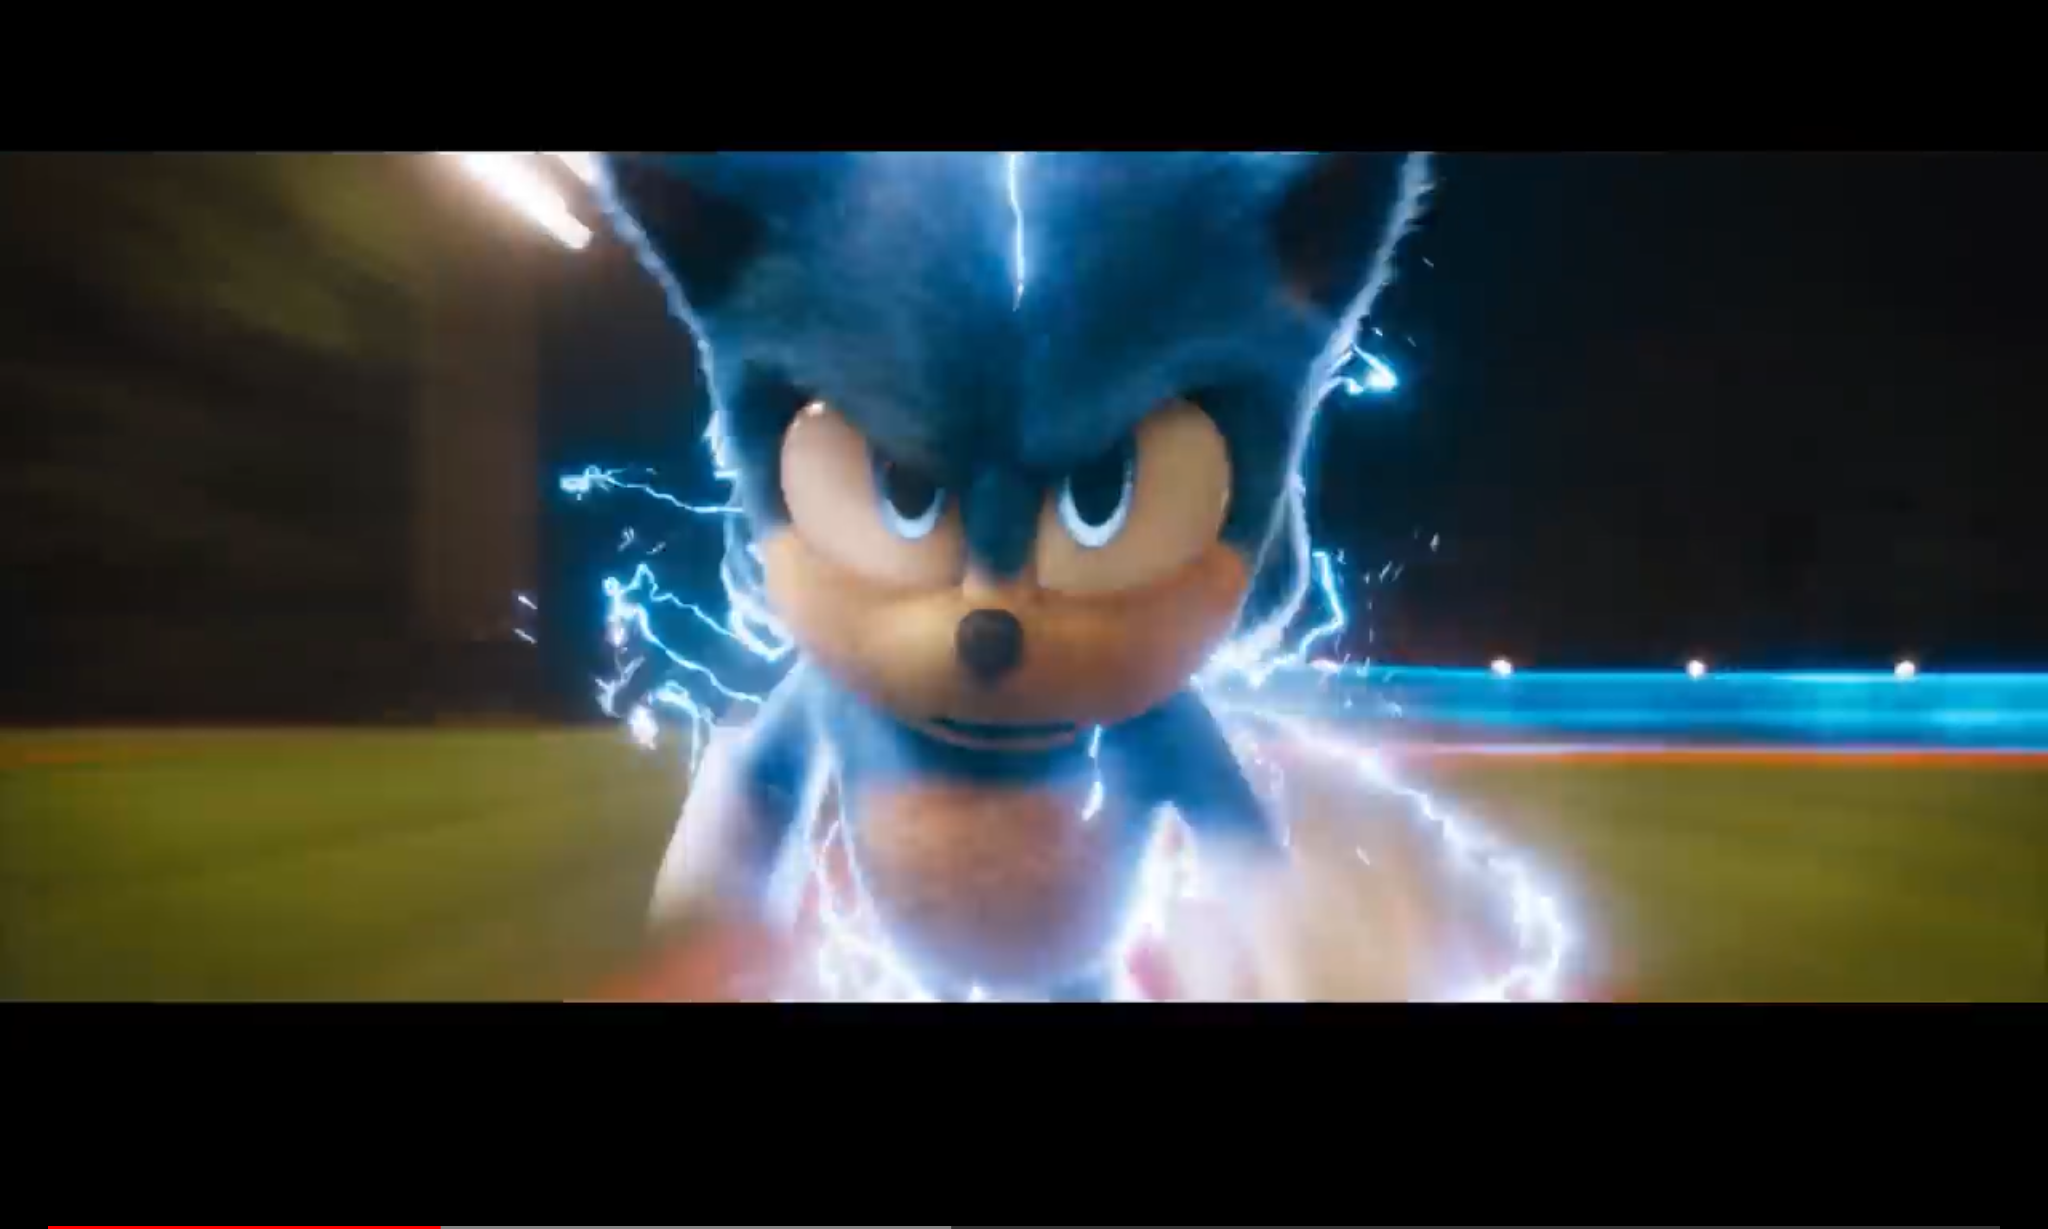 Movie sonic going fast Blank Meme Template